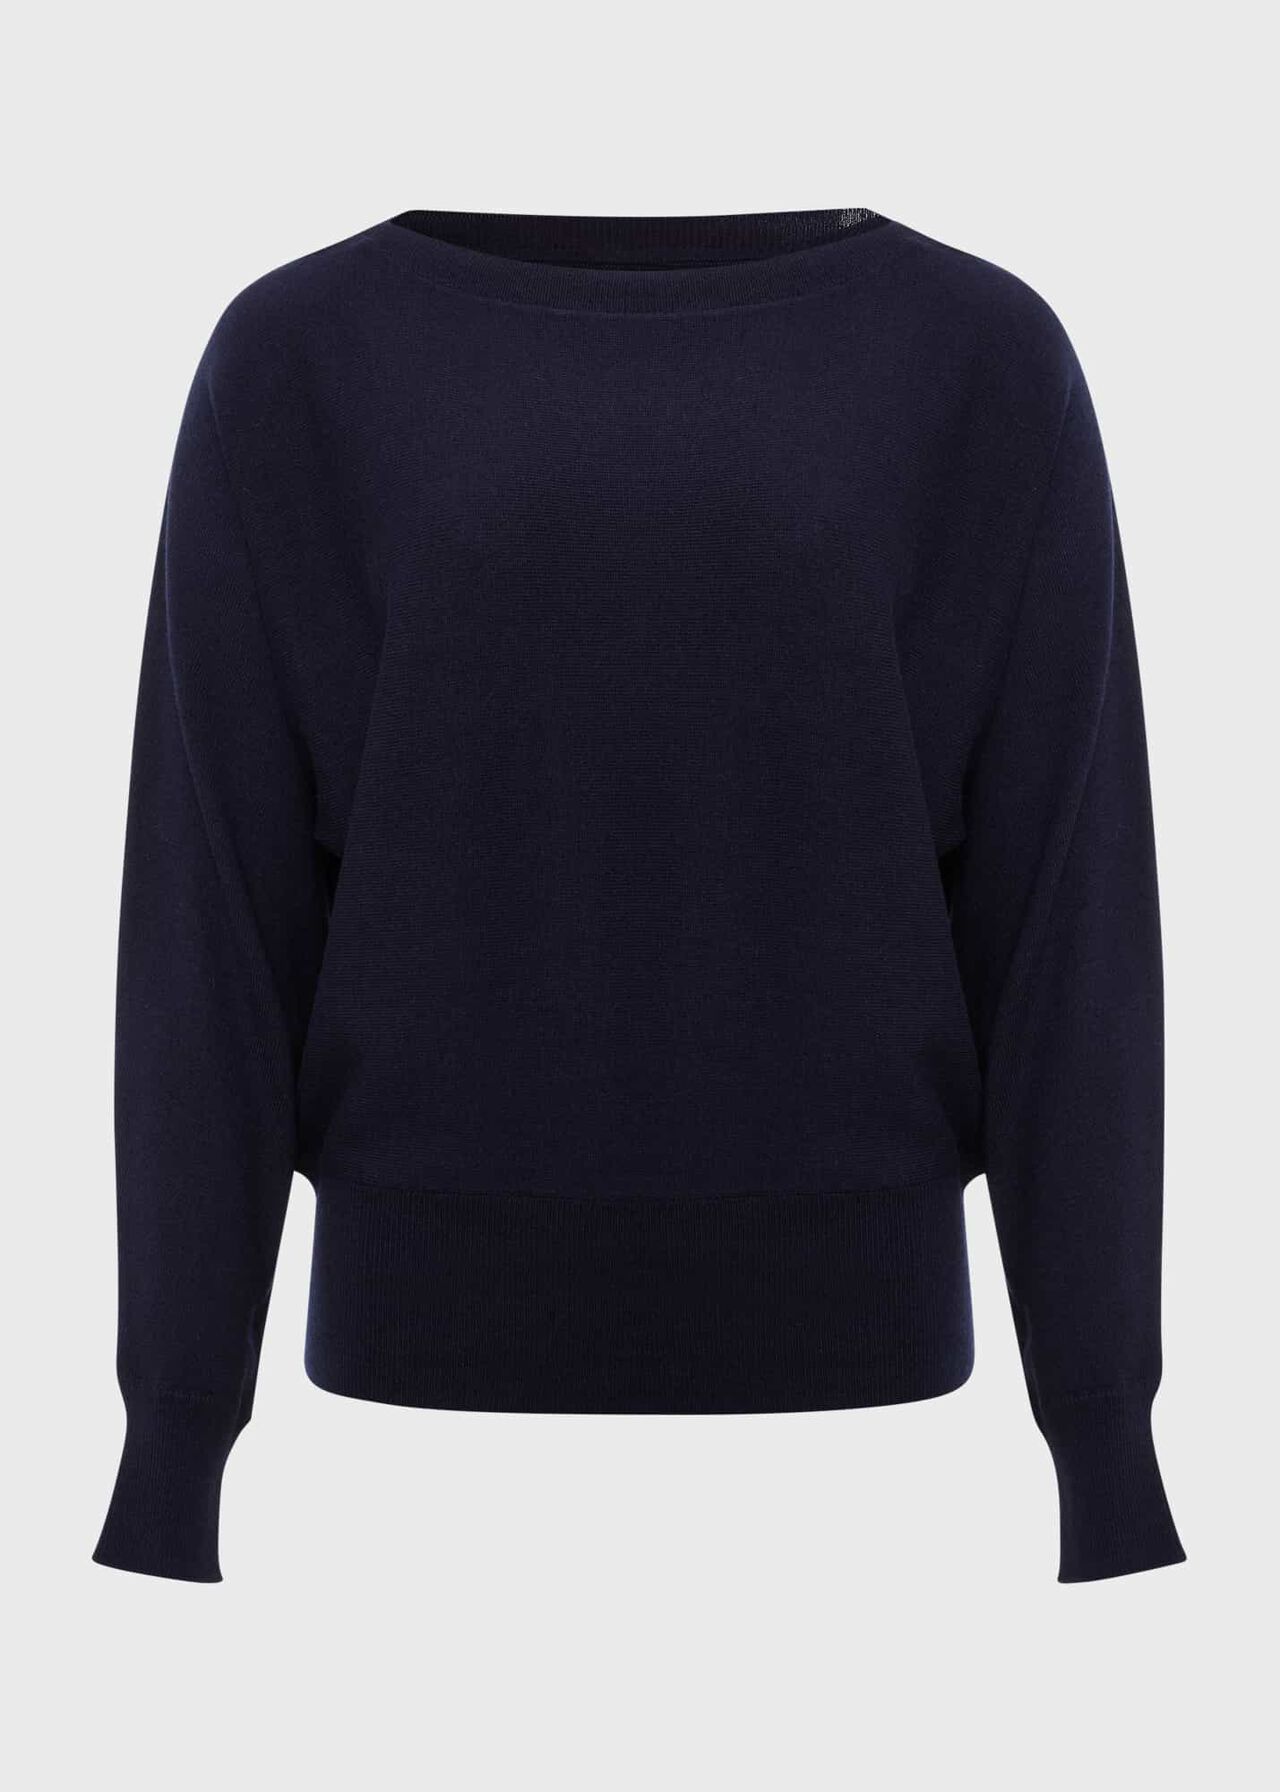 Lucia Jumper With Cashmere, Hobbs Navy, hi-res